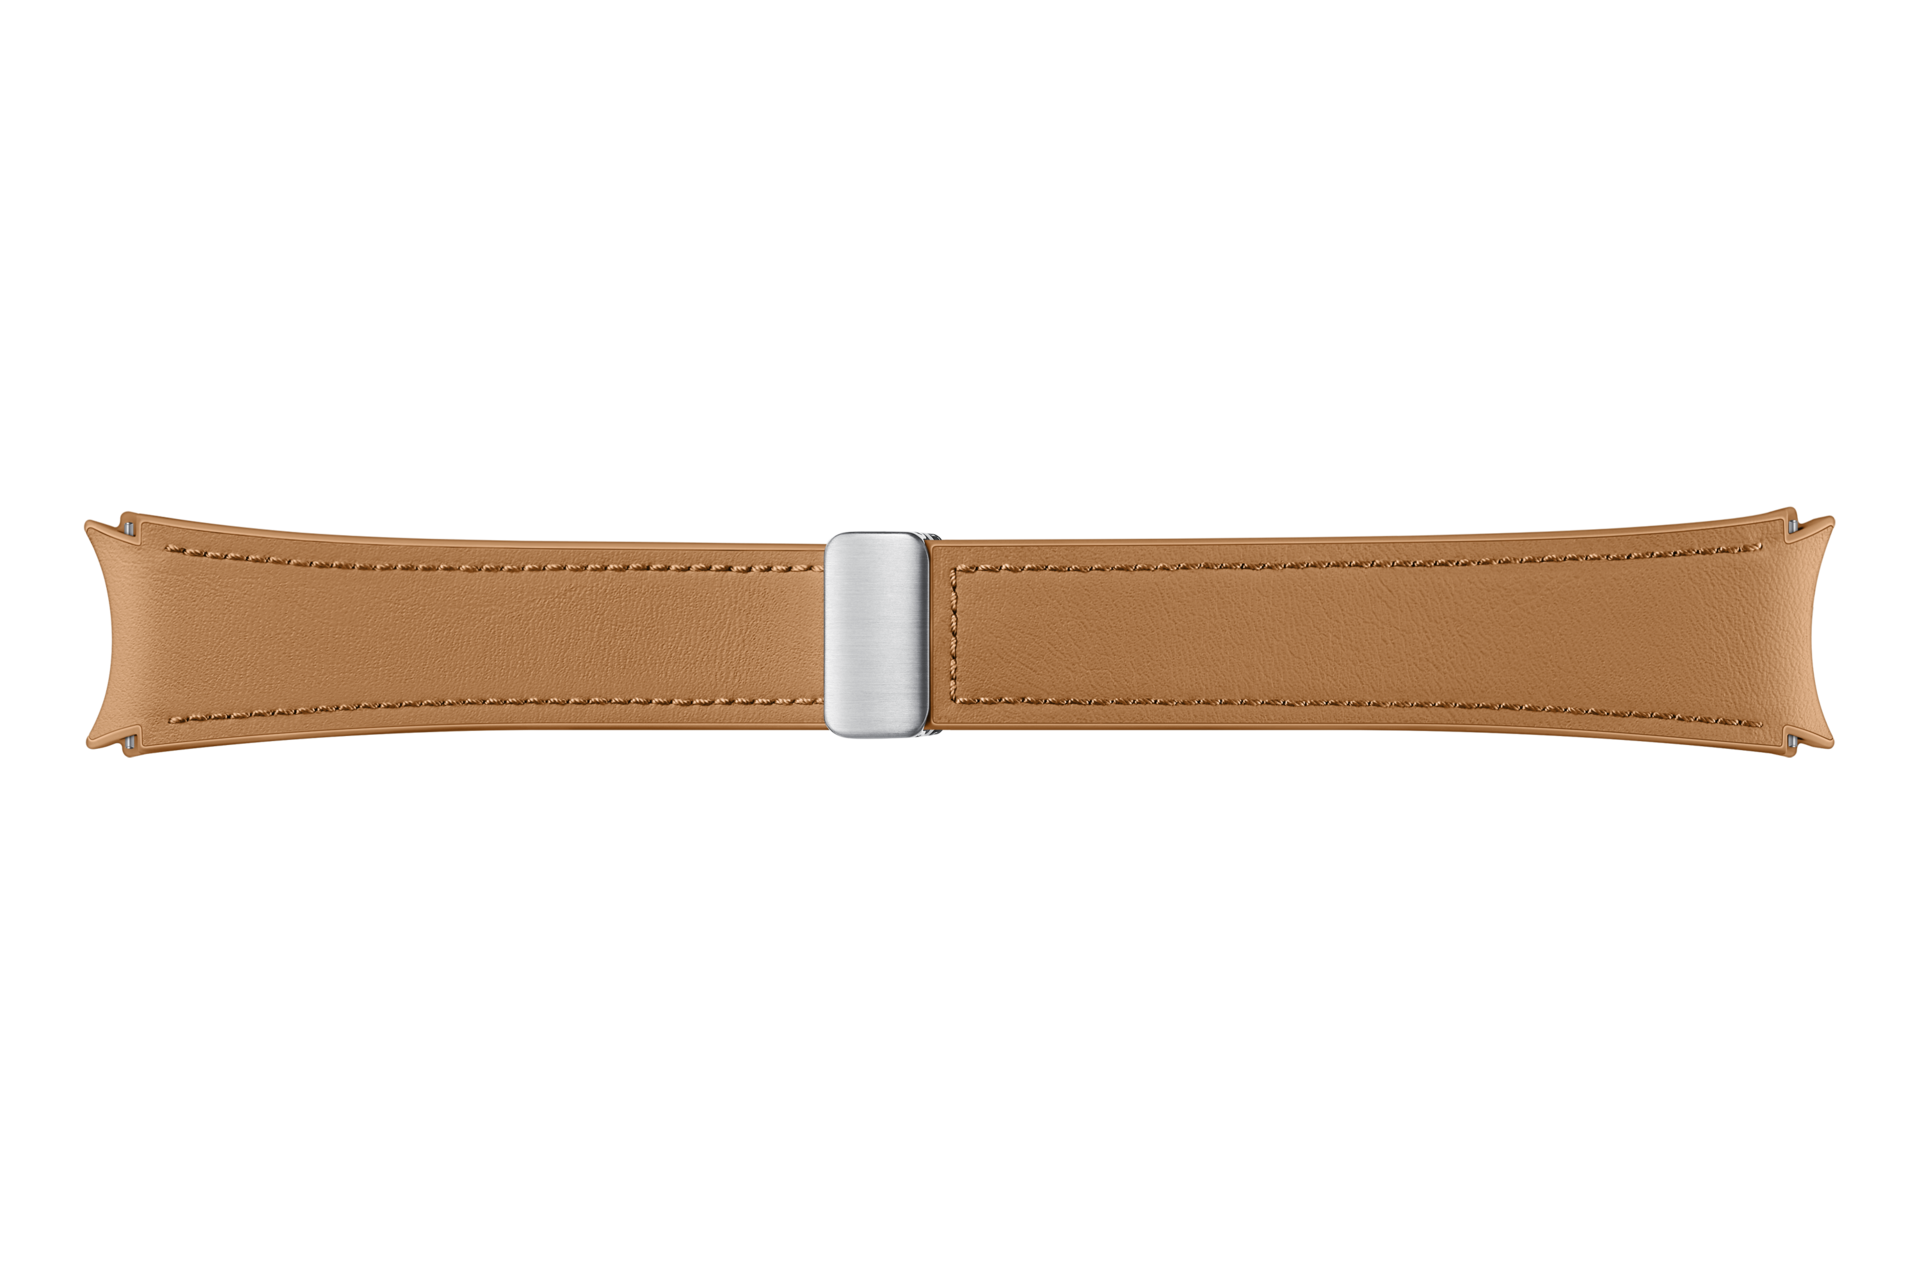 Samsung D-buckle Hybrid Eco-leather Band (normal, S/m) Cinturino In Finta Pelle 